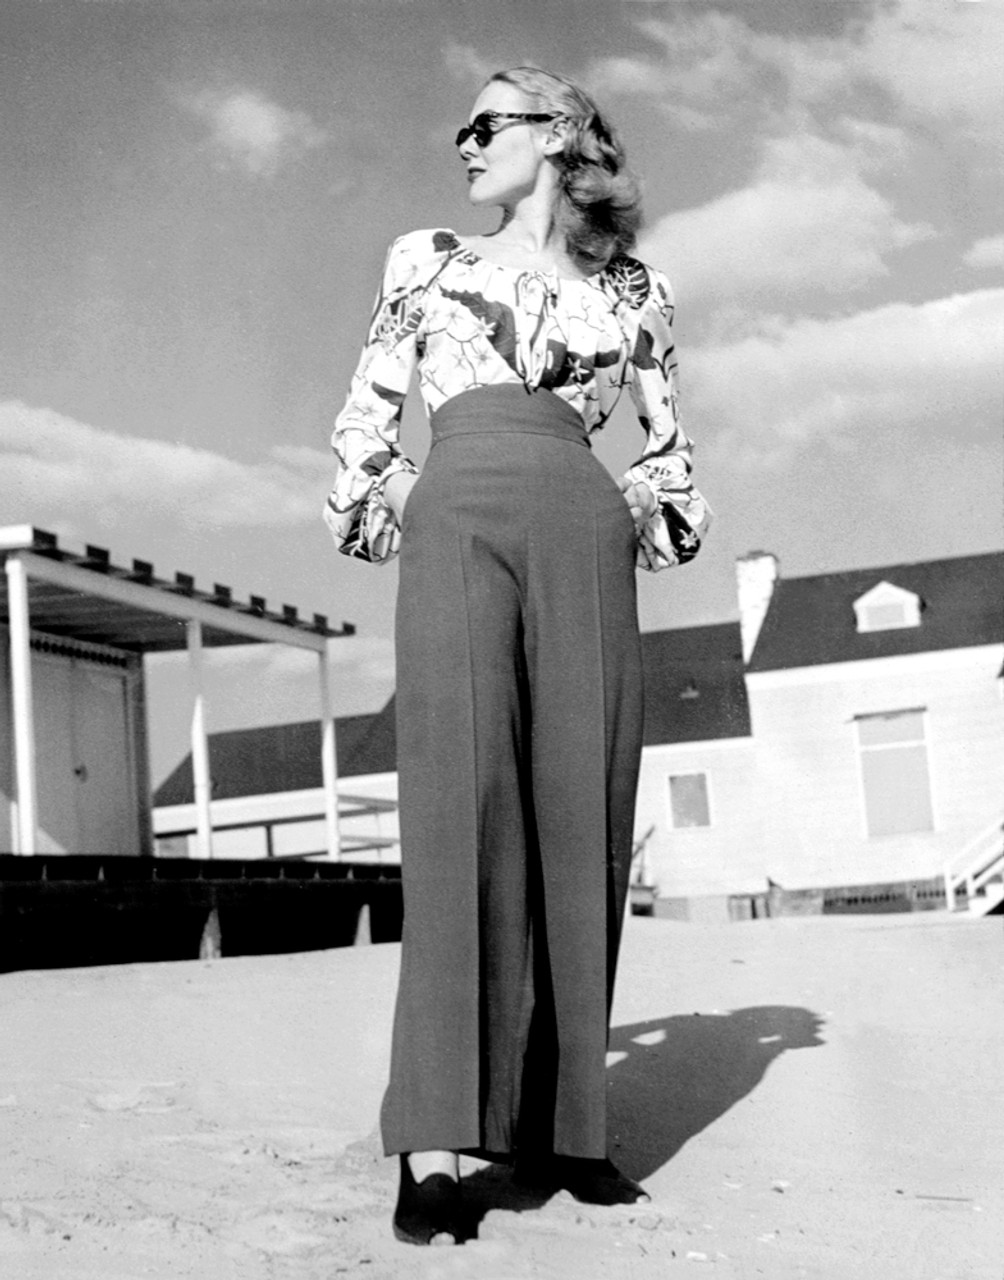 1940S Fashion A Peasant Top With Blousson Sleeves And A Tropical Floral  Pattern With High-Waisted Pants History - Item # VAREVCSBDFASHCS003